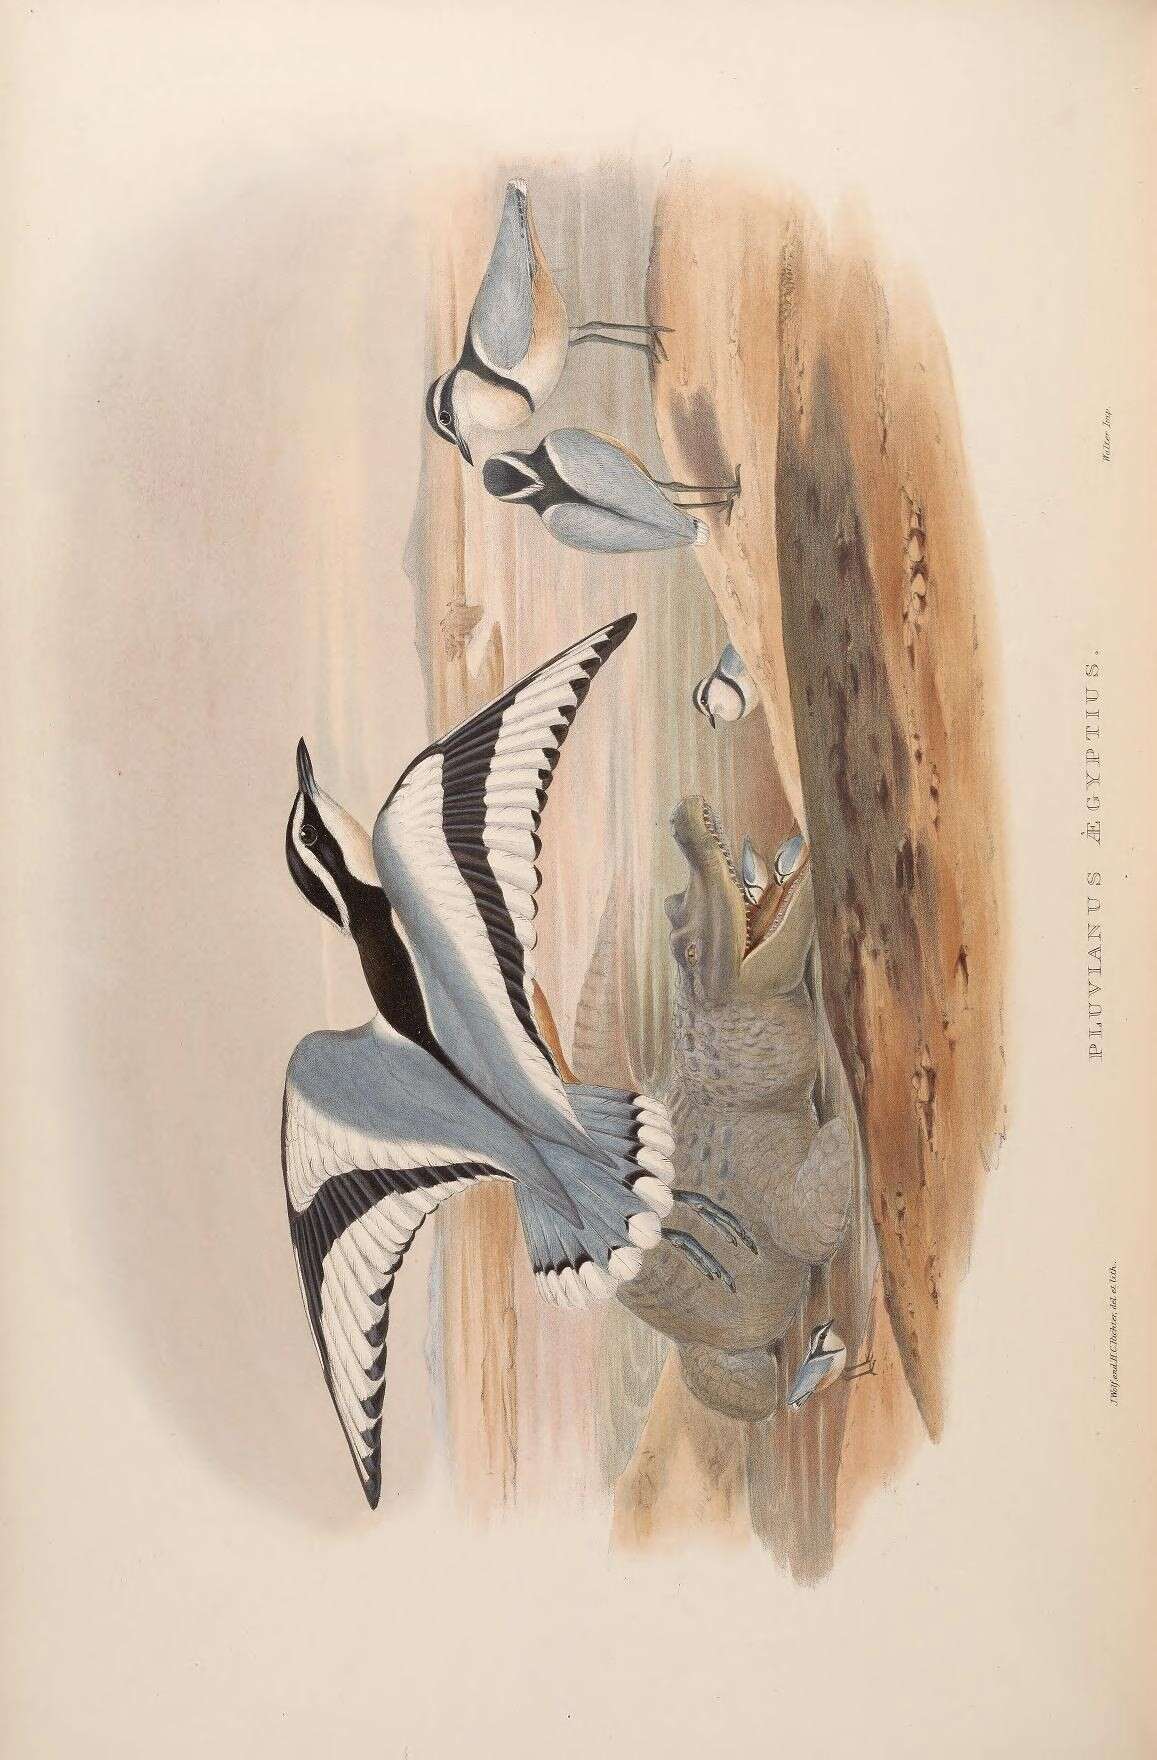 Image of Egyptian plovers